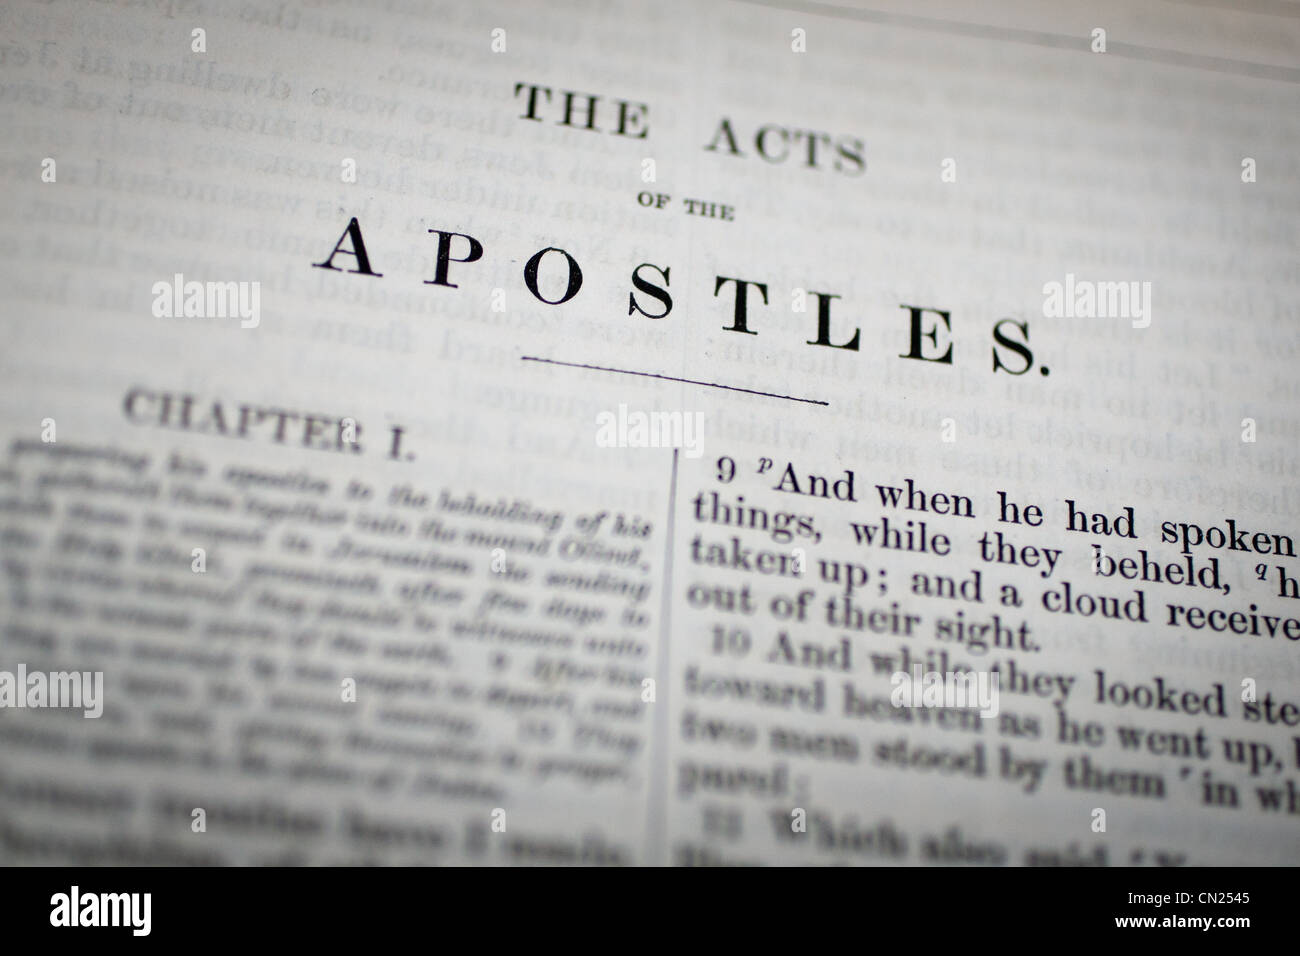 The Acts of the Apostles Bible heading Stock Photo